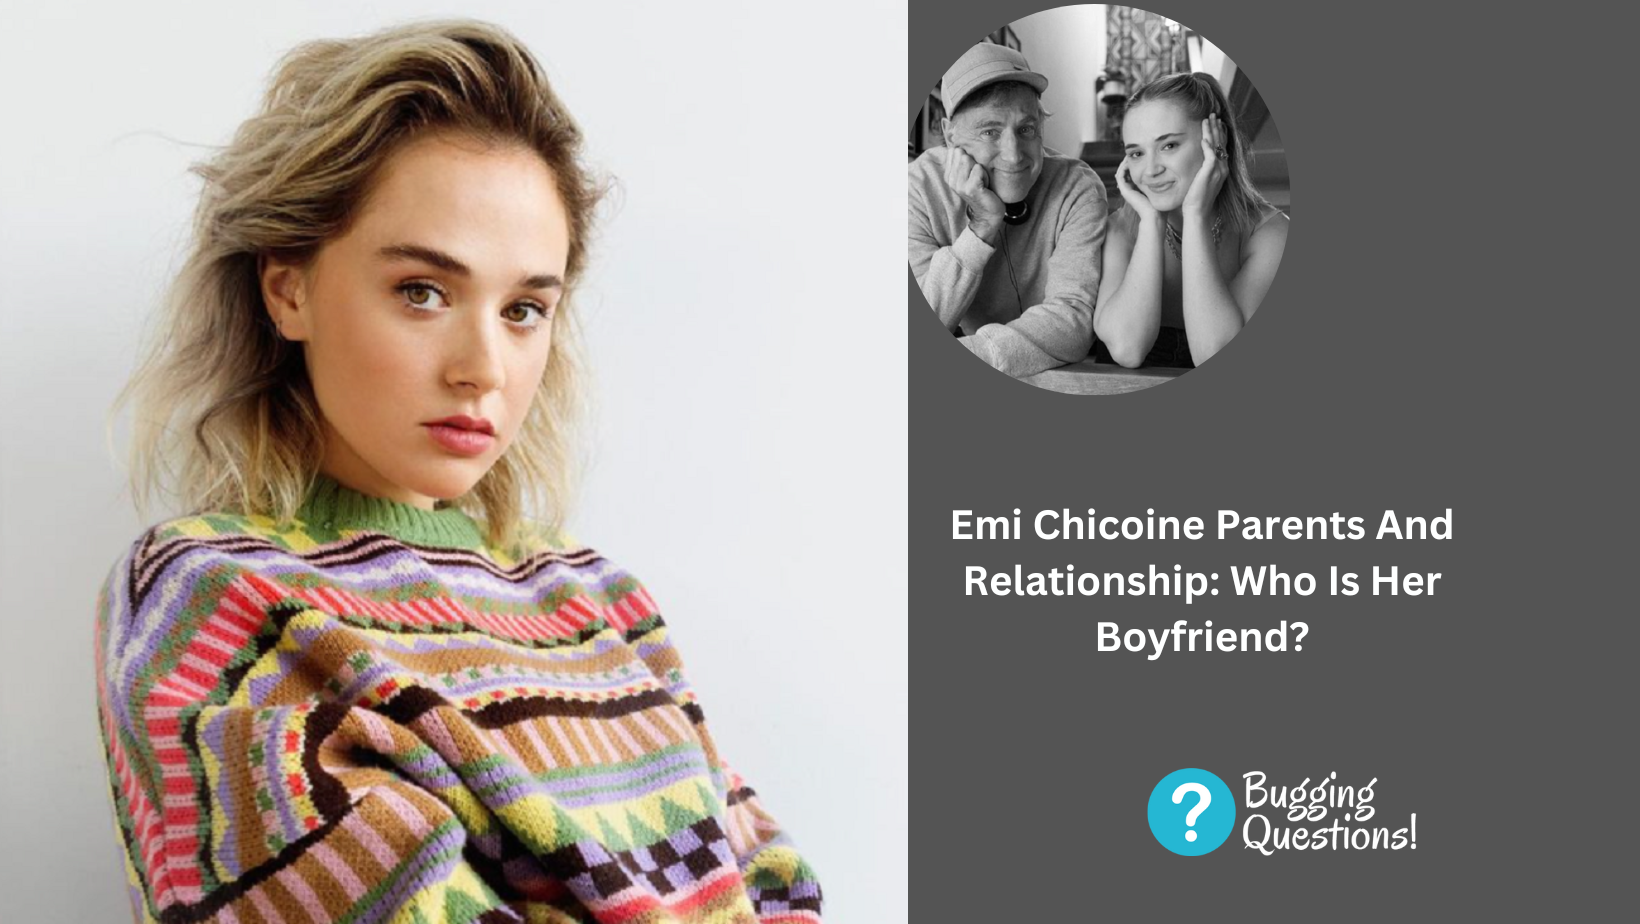 Emi Chicoine Parents And Relationship: Who Is Her Boyfriend?